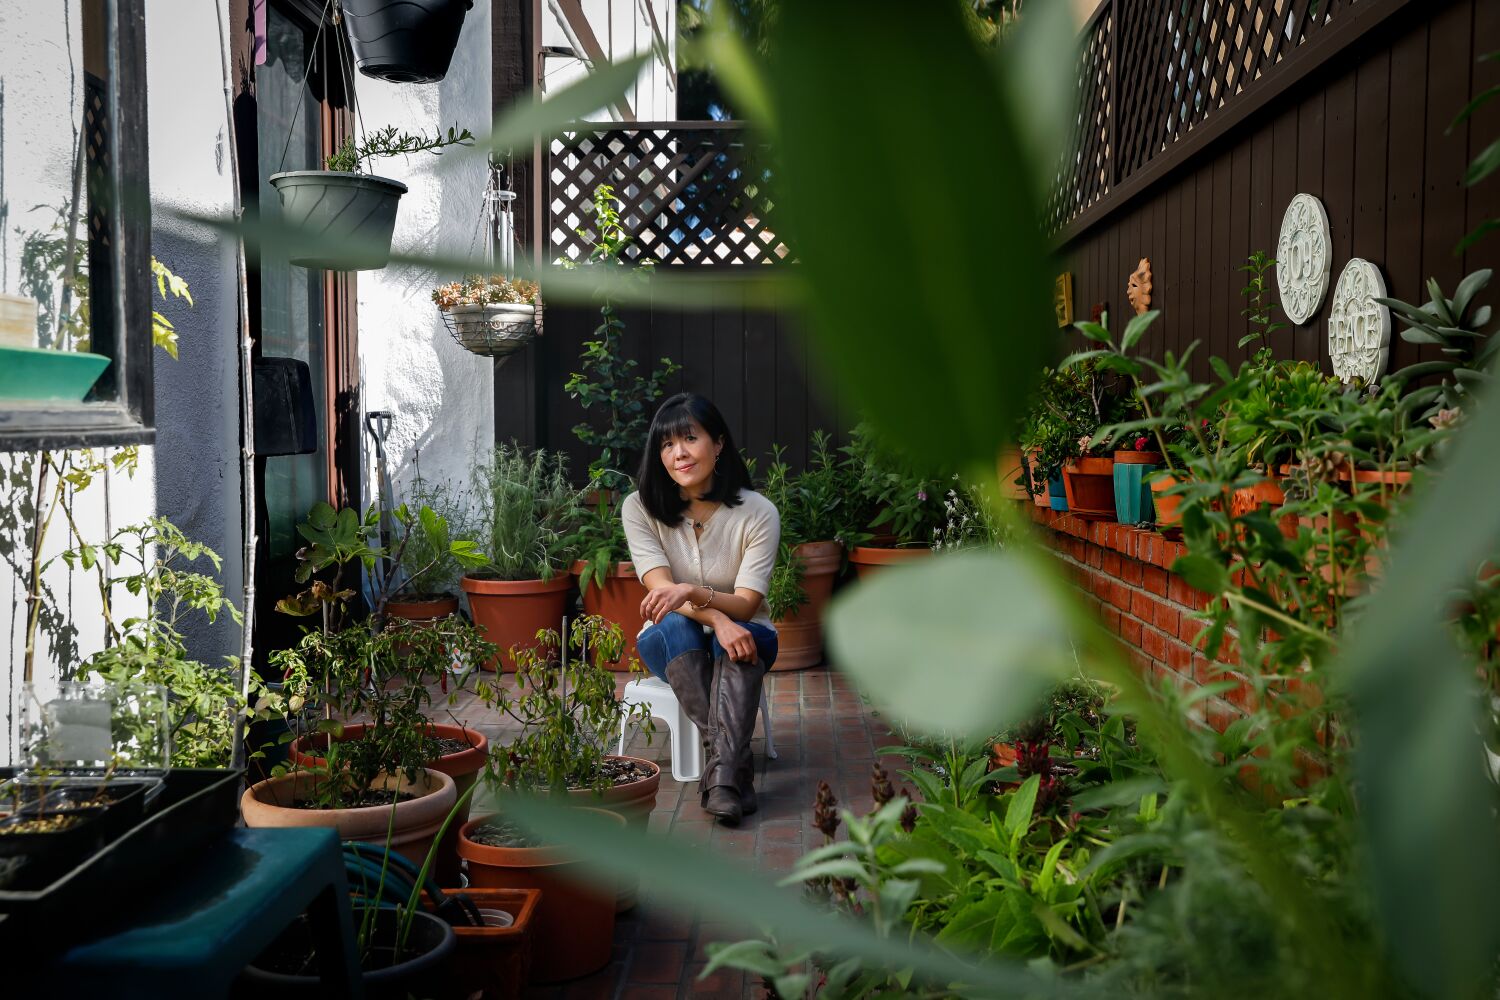 Her tiny native plant habitat garden is flourishing. And she didn't even need a yard